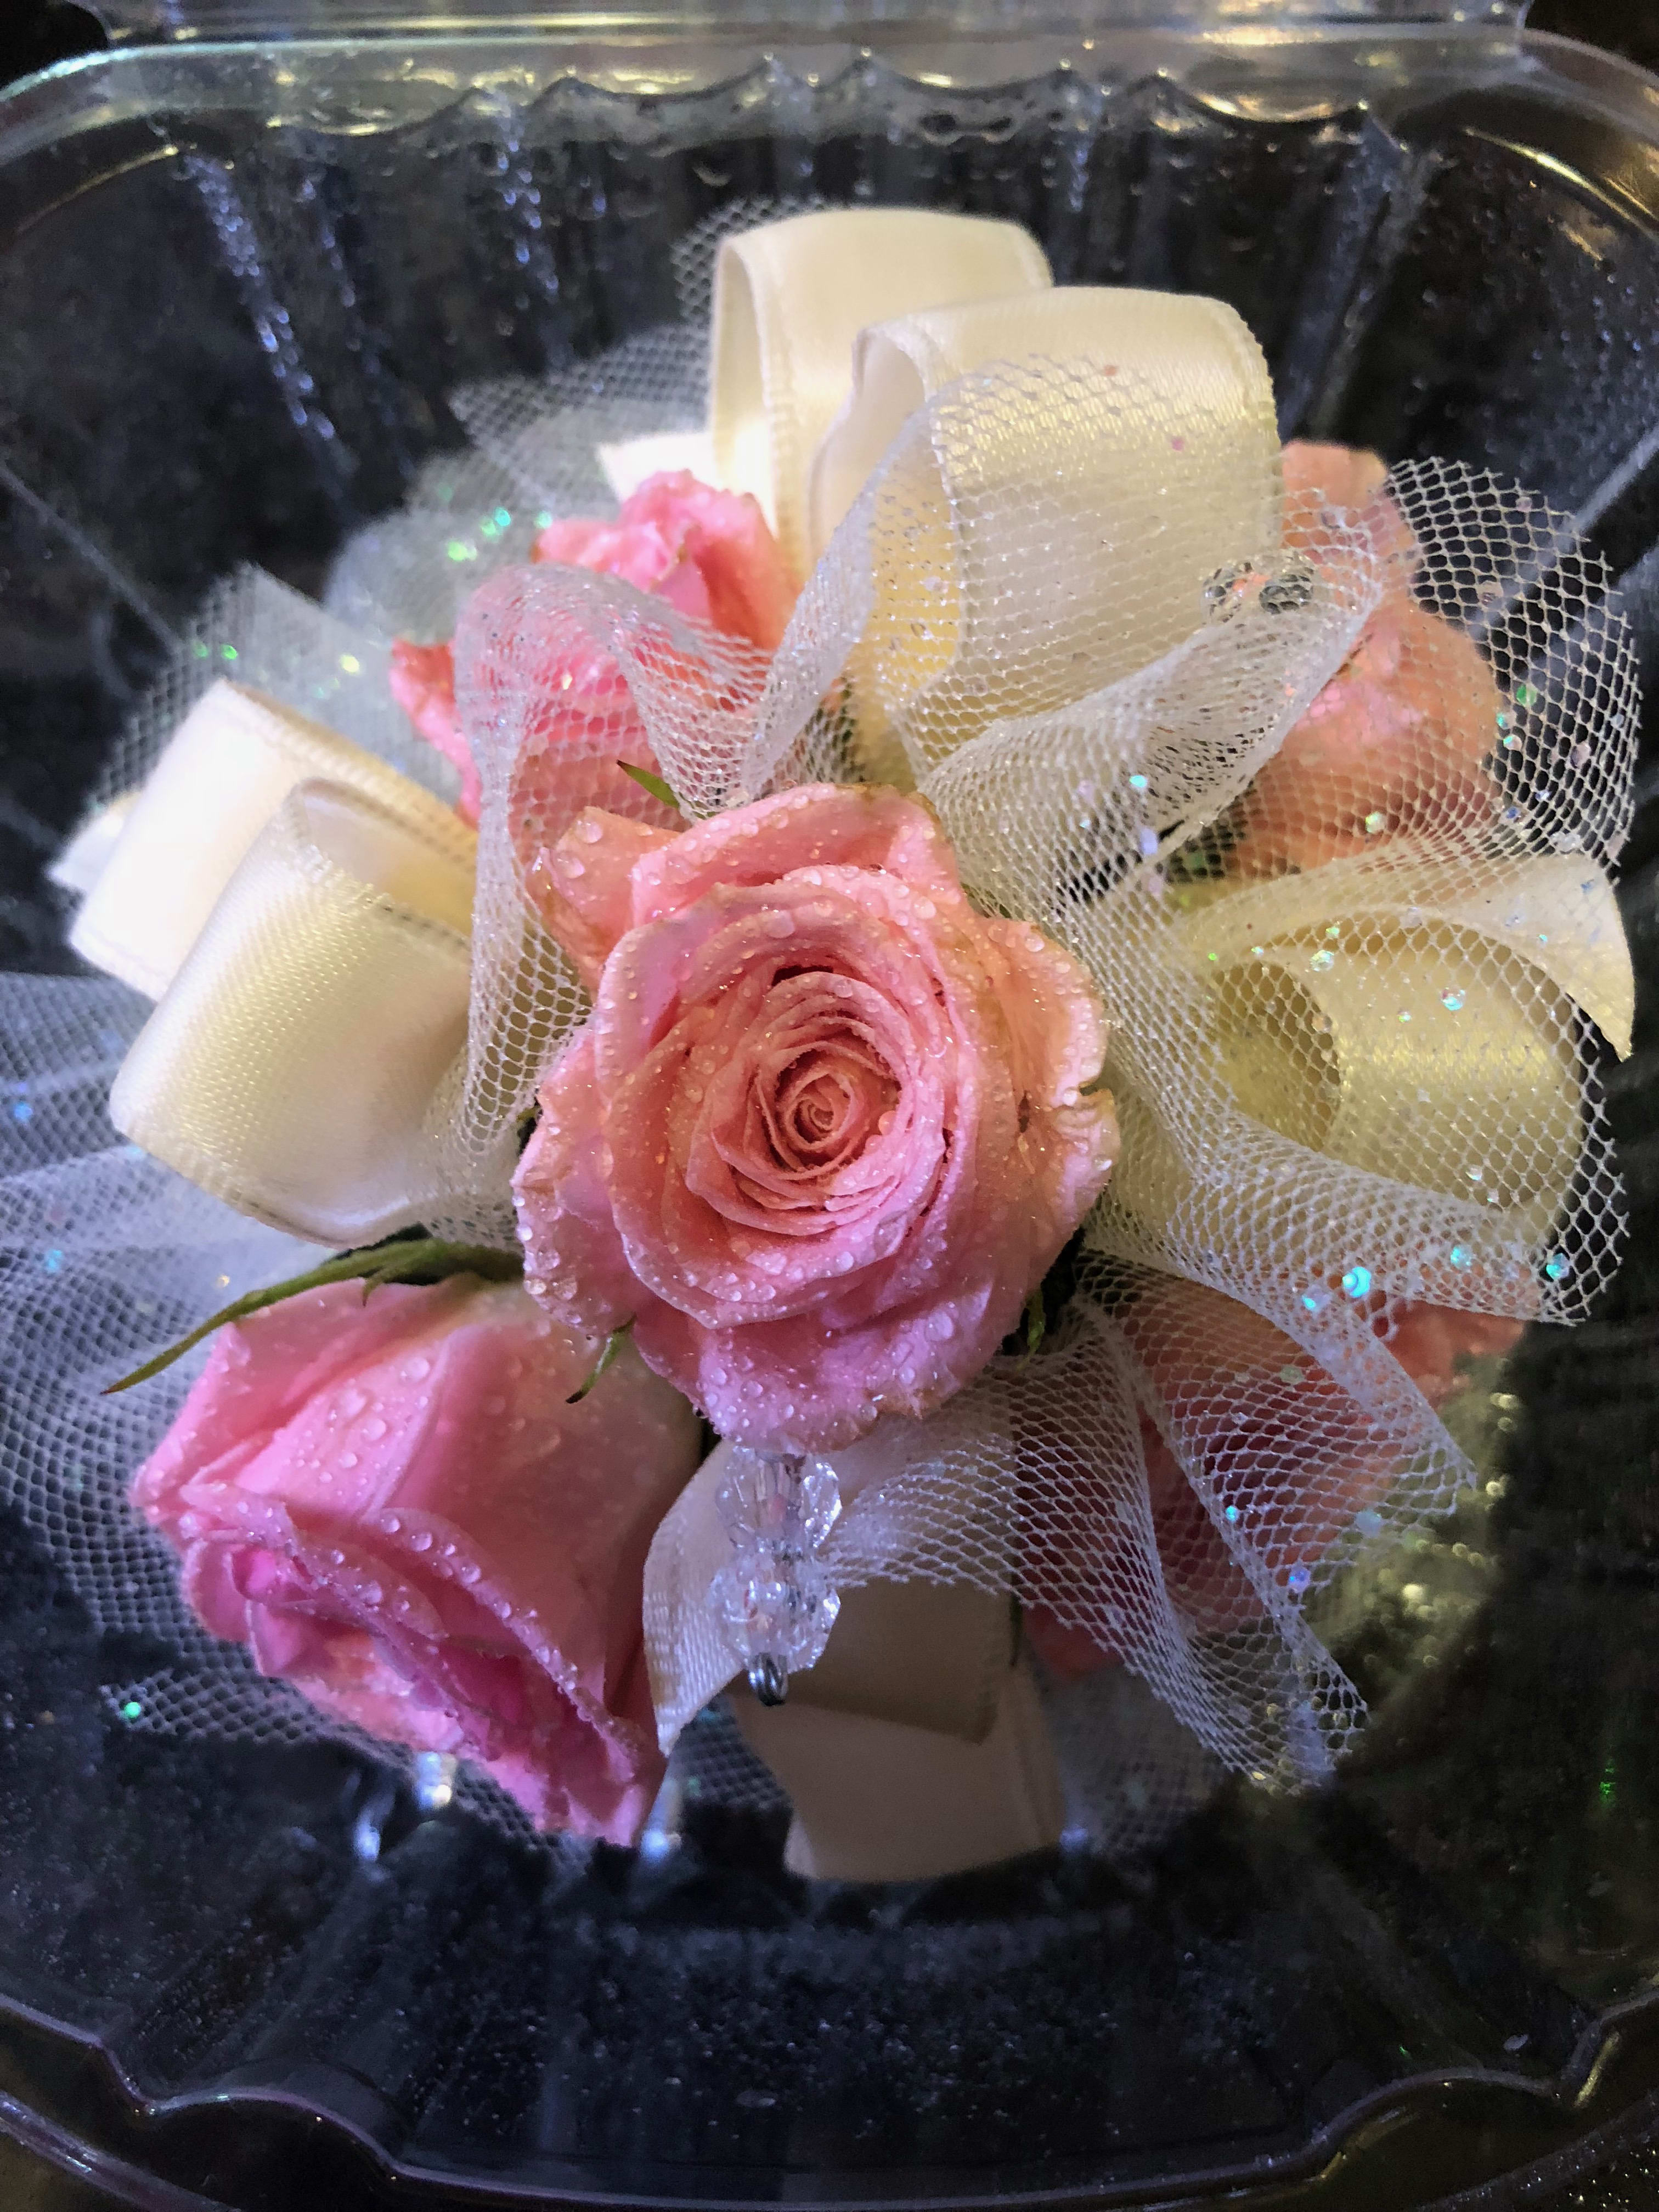 Wrist Floral Corsages - Make a statement with your choice of flowers to complement your dress. 5 spray roses with ribbon accents, tulle and glitter.  Wrist or pinned corsages set you apart from the rest with flowers. Custom designed with you in mind. Matching bouts for your date can complete the set.